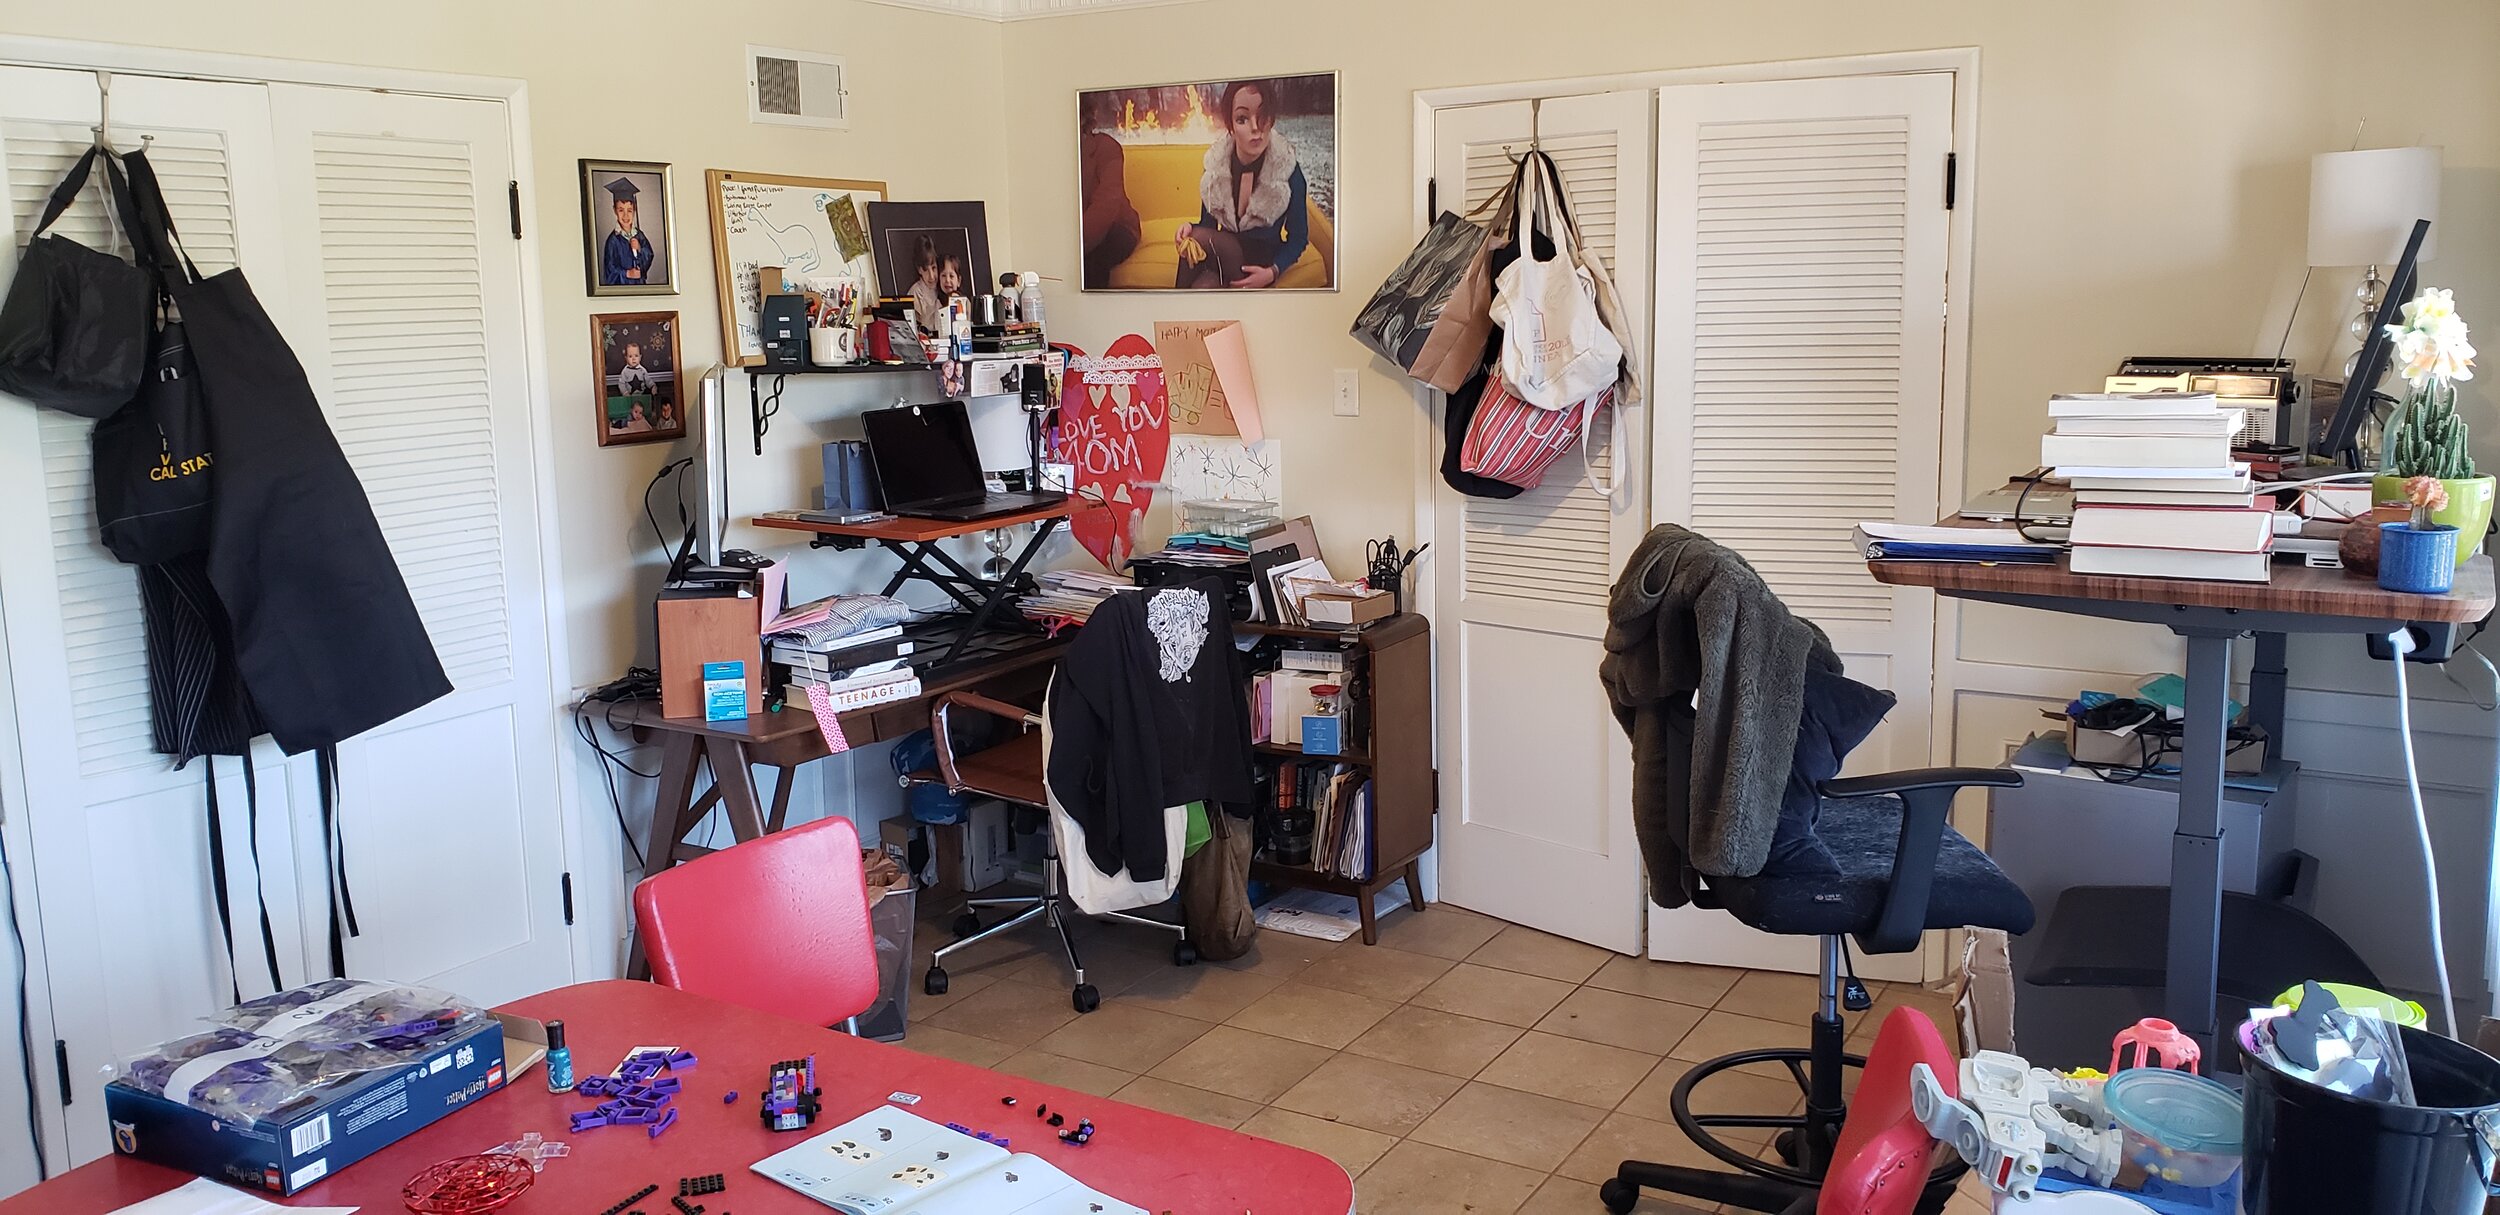 Image by Sharon A. Mooney of her dining room which now includes her teaching and work desk, the work space of her partner, and their child’s classroom:art space.jpg